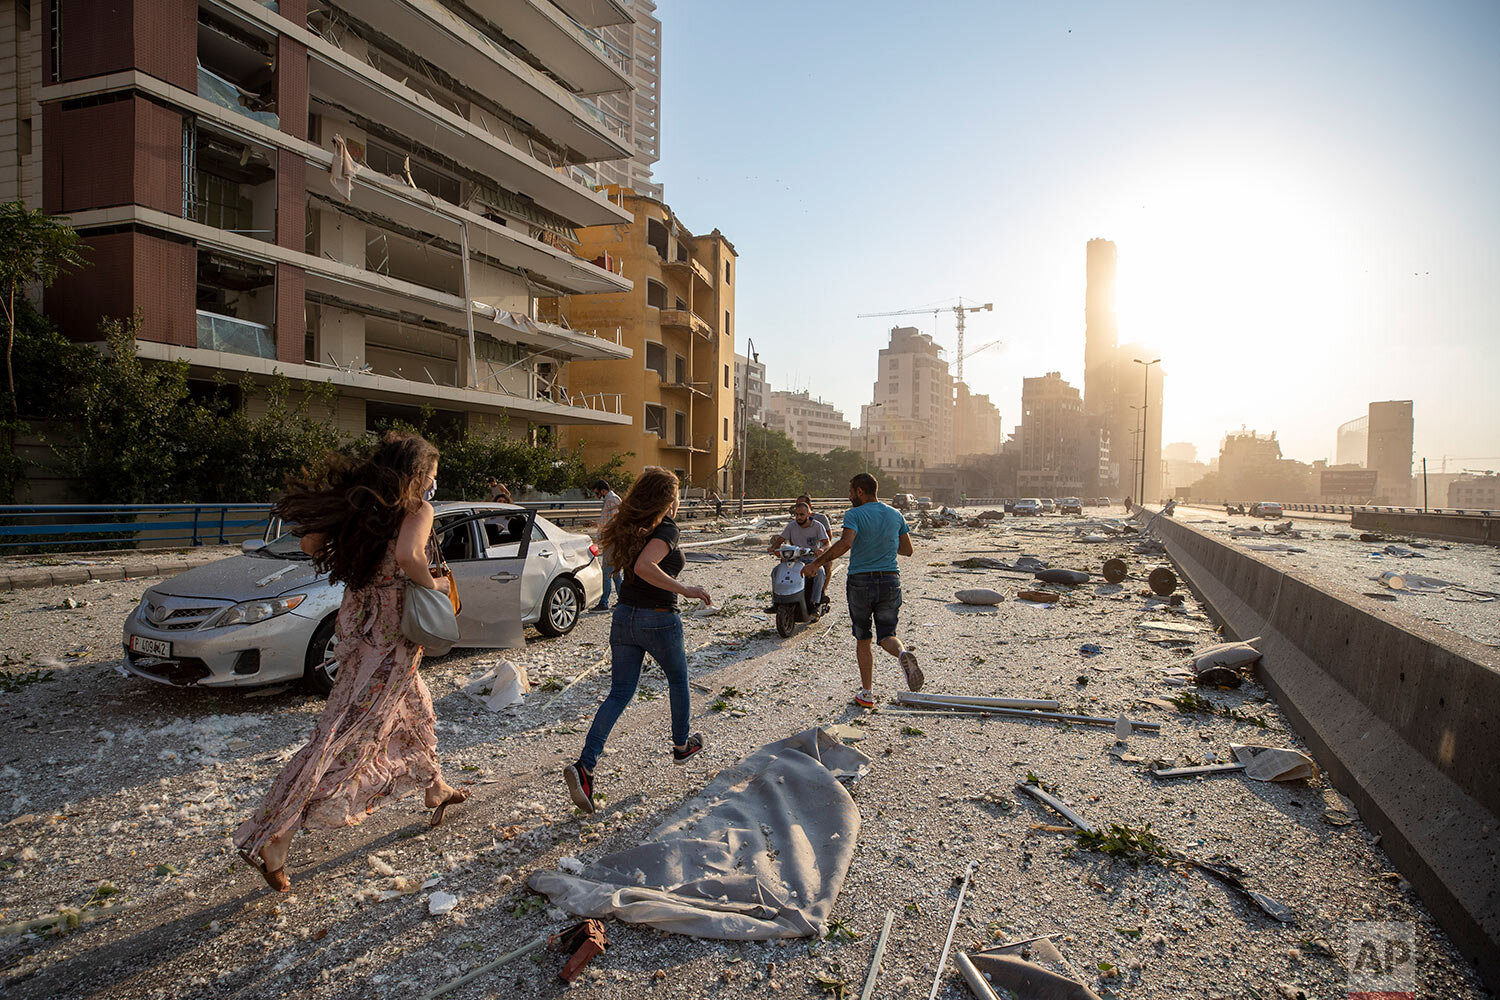  People run in the aftermath of a massive explosion in Beirut, Lebanon, Tuesday, Aug. 4, 2020. (AP Photo/Hassan Ammar) 